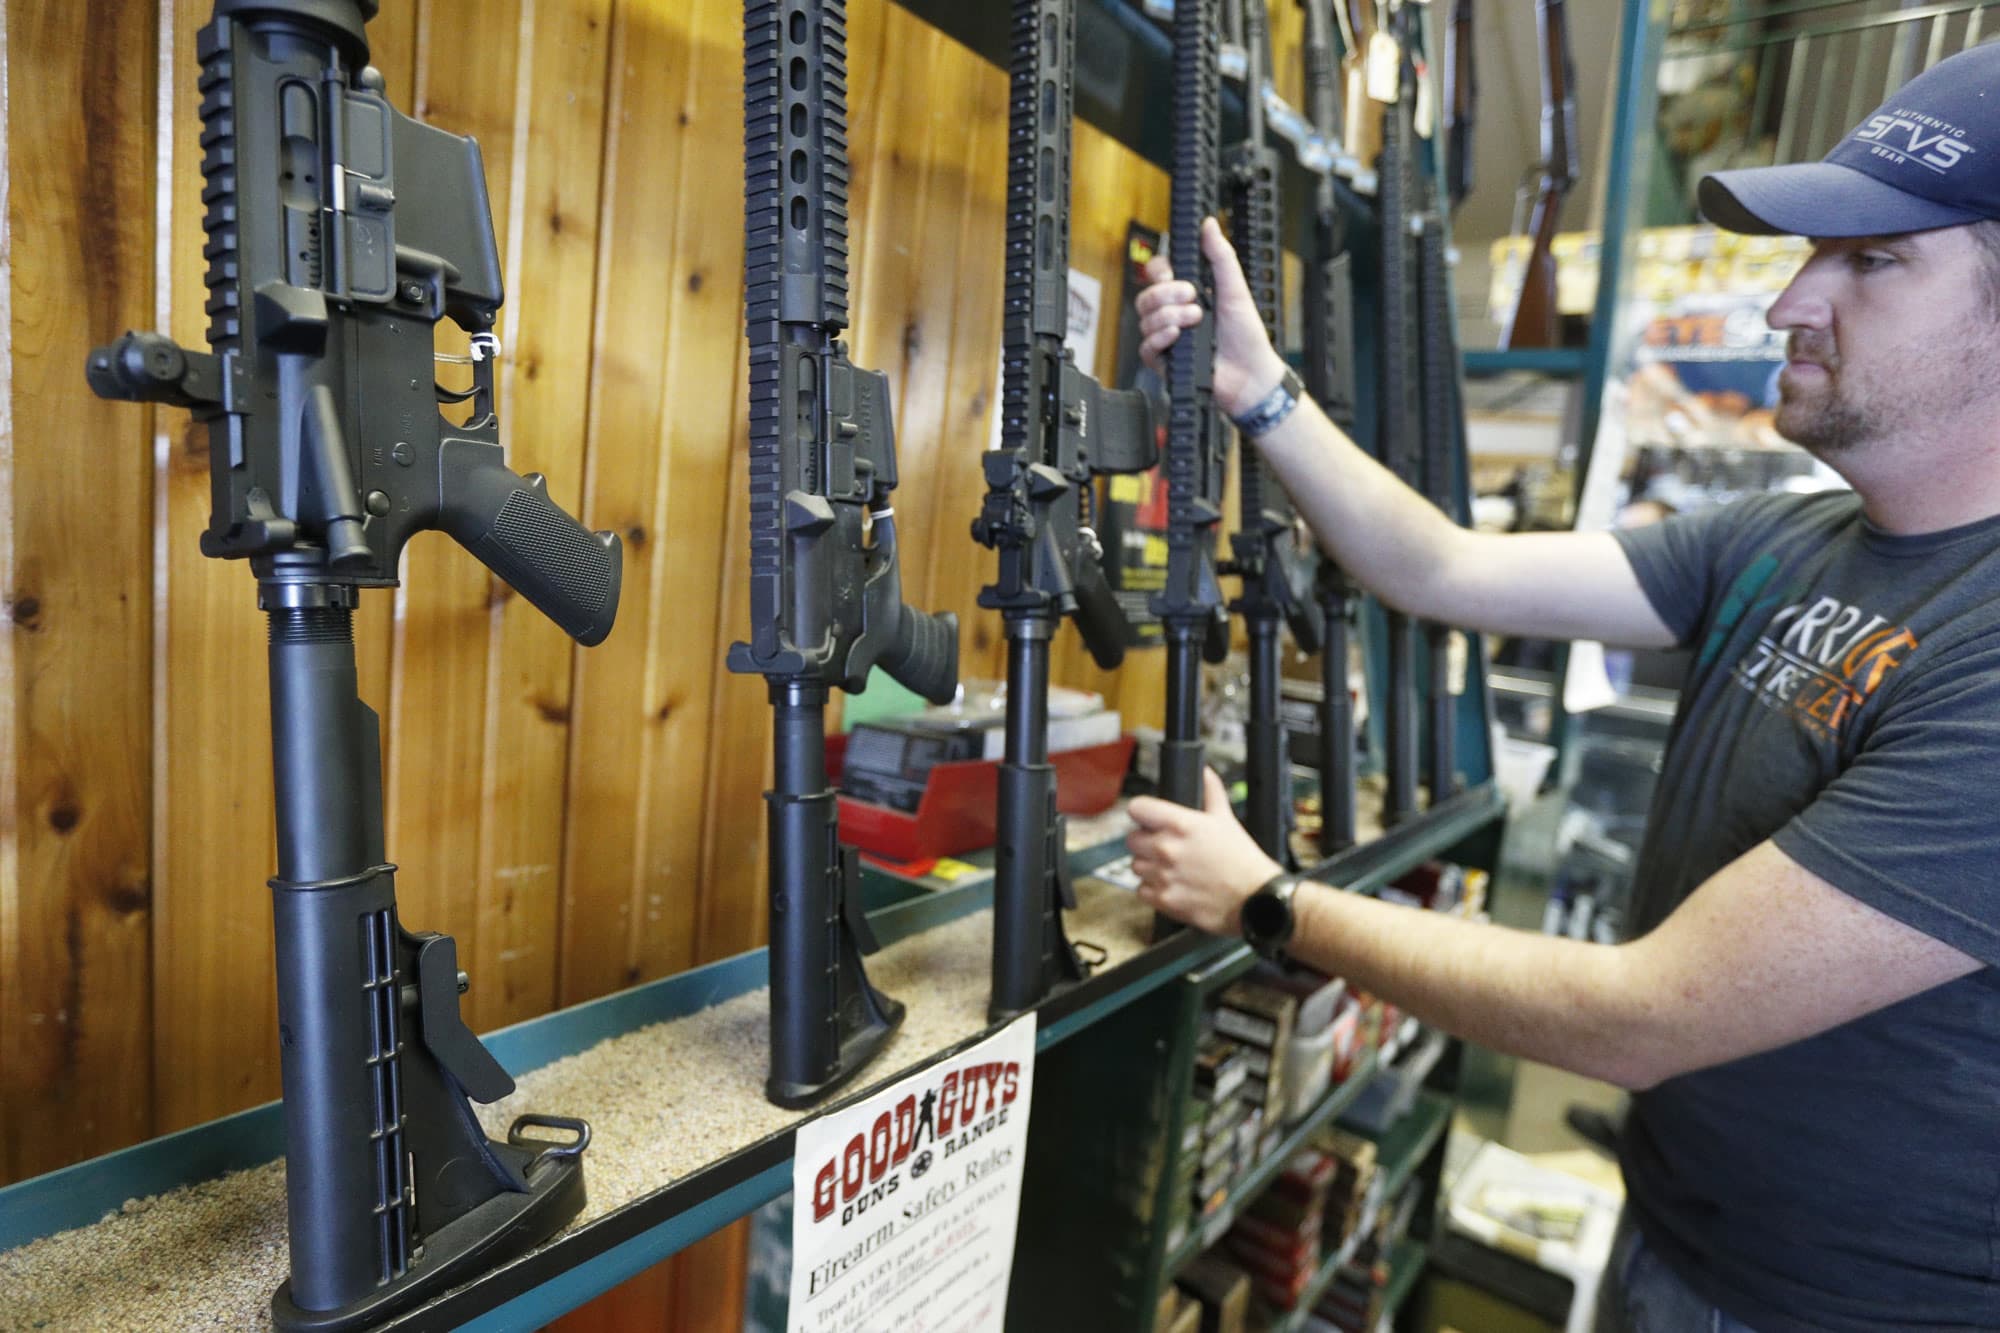 What’s fueling the file surge of gun gross sales in America